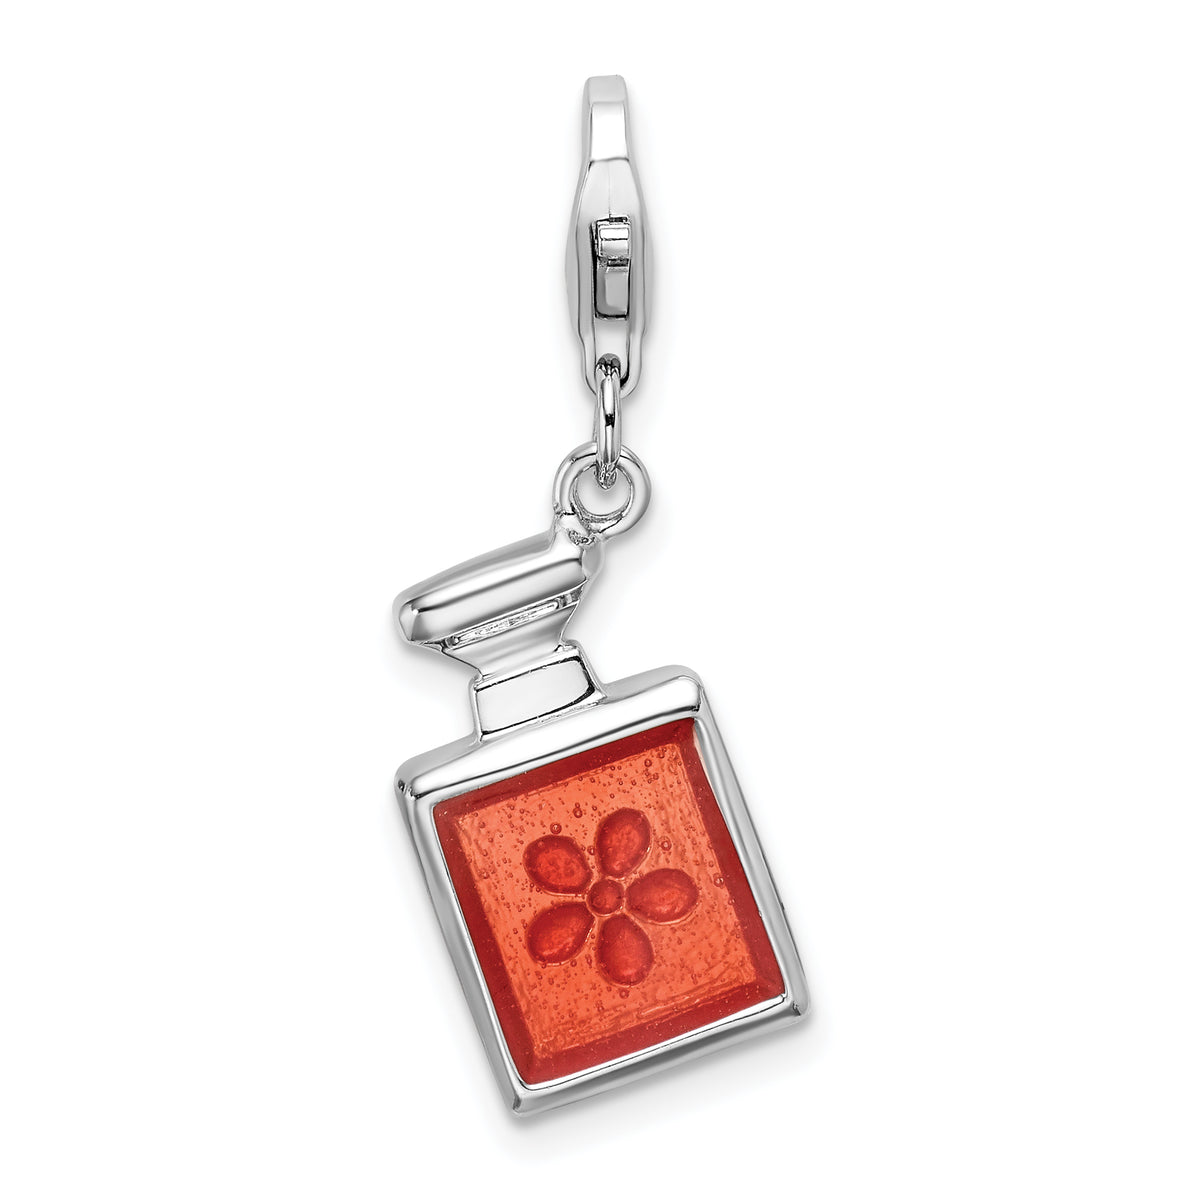 Amore La Vita Sterling Silver Rhodium-plated Polished 3-D Orange Enameled Perfume Bottle Charm with Fancy Lobster Clasp